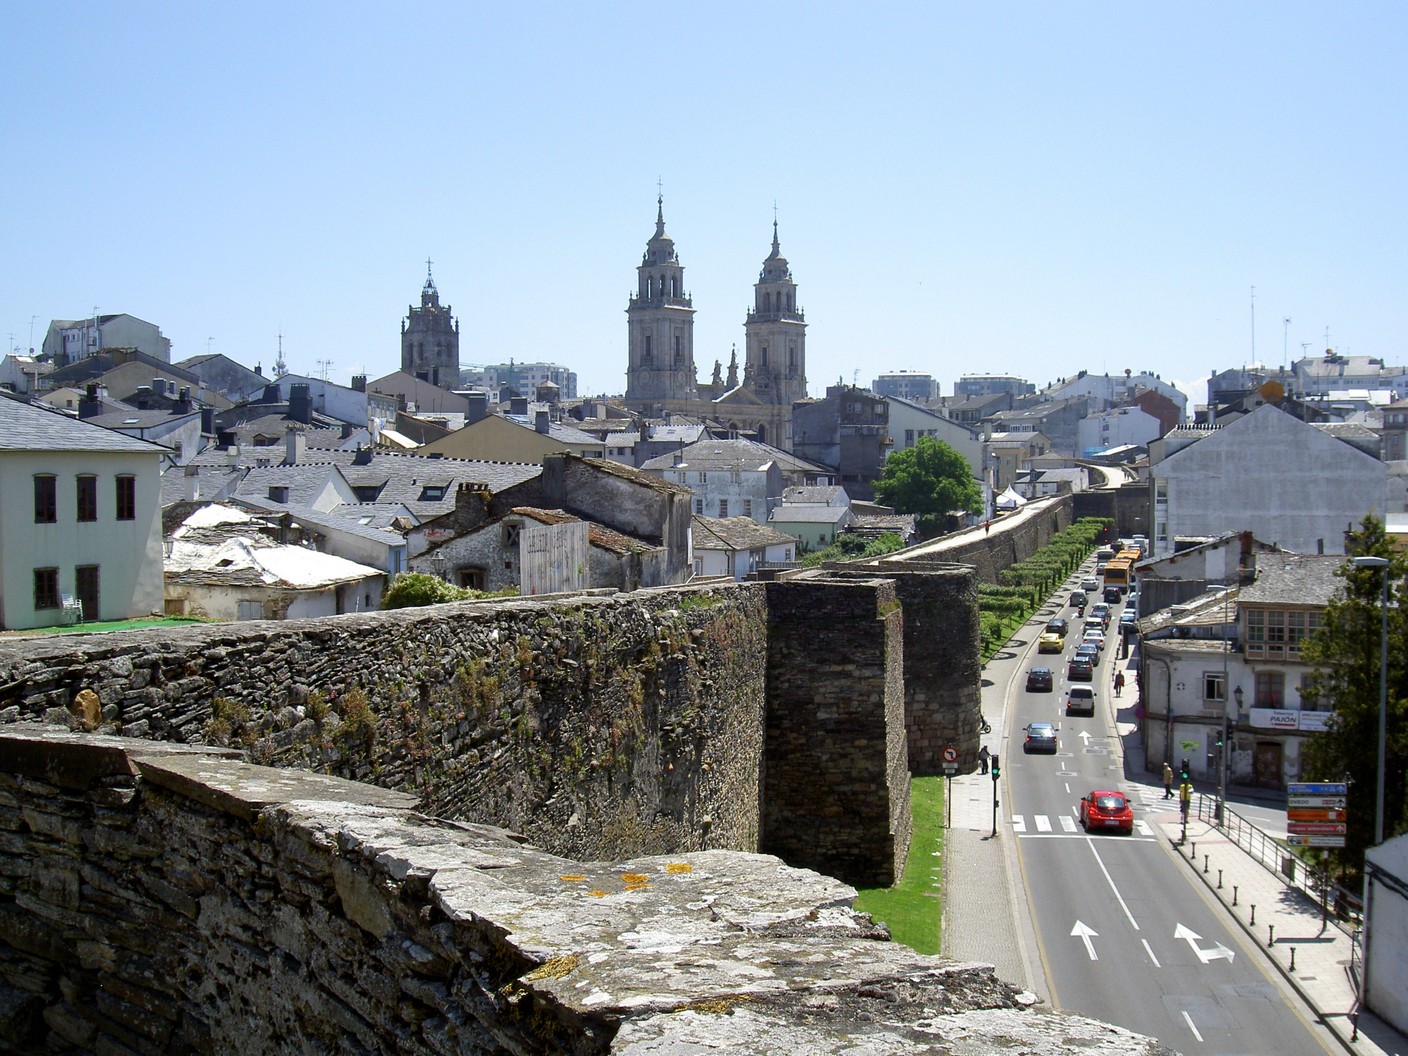 The walled city of Lugo and its magnificent cathedral